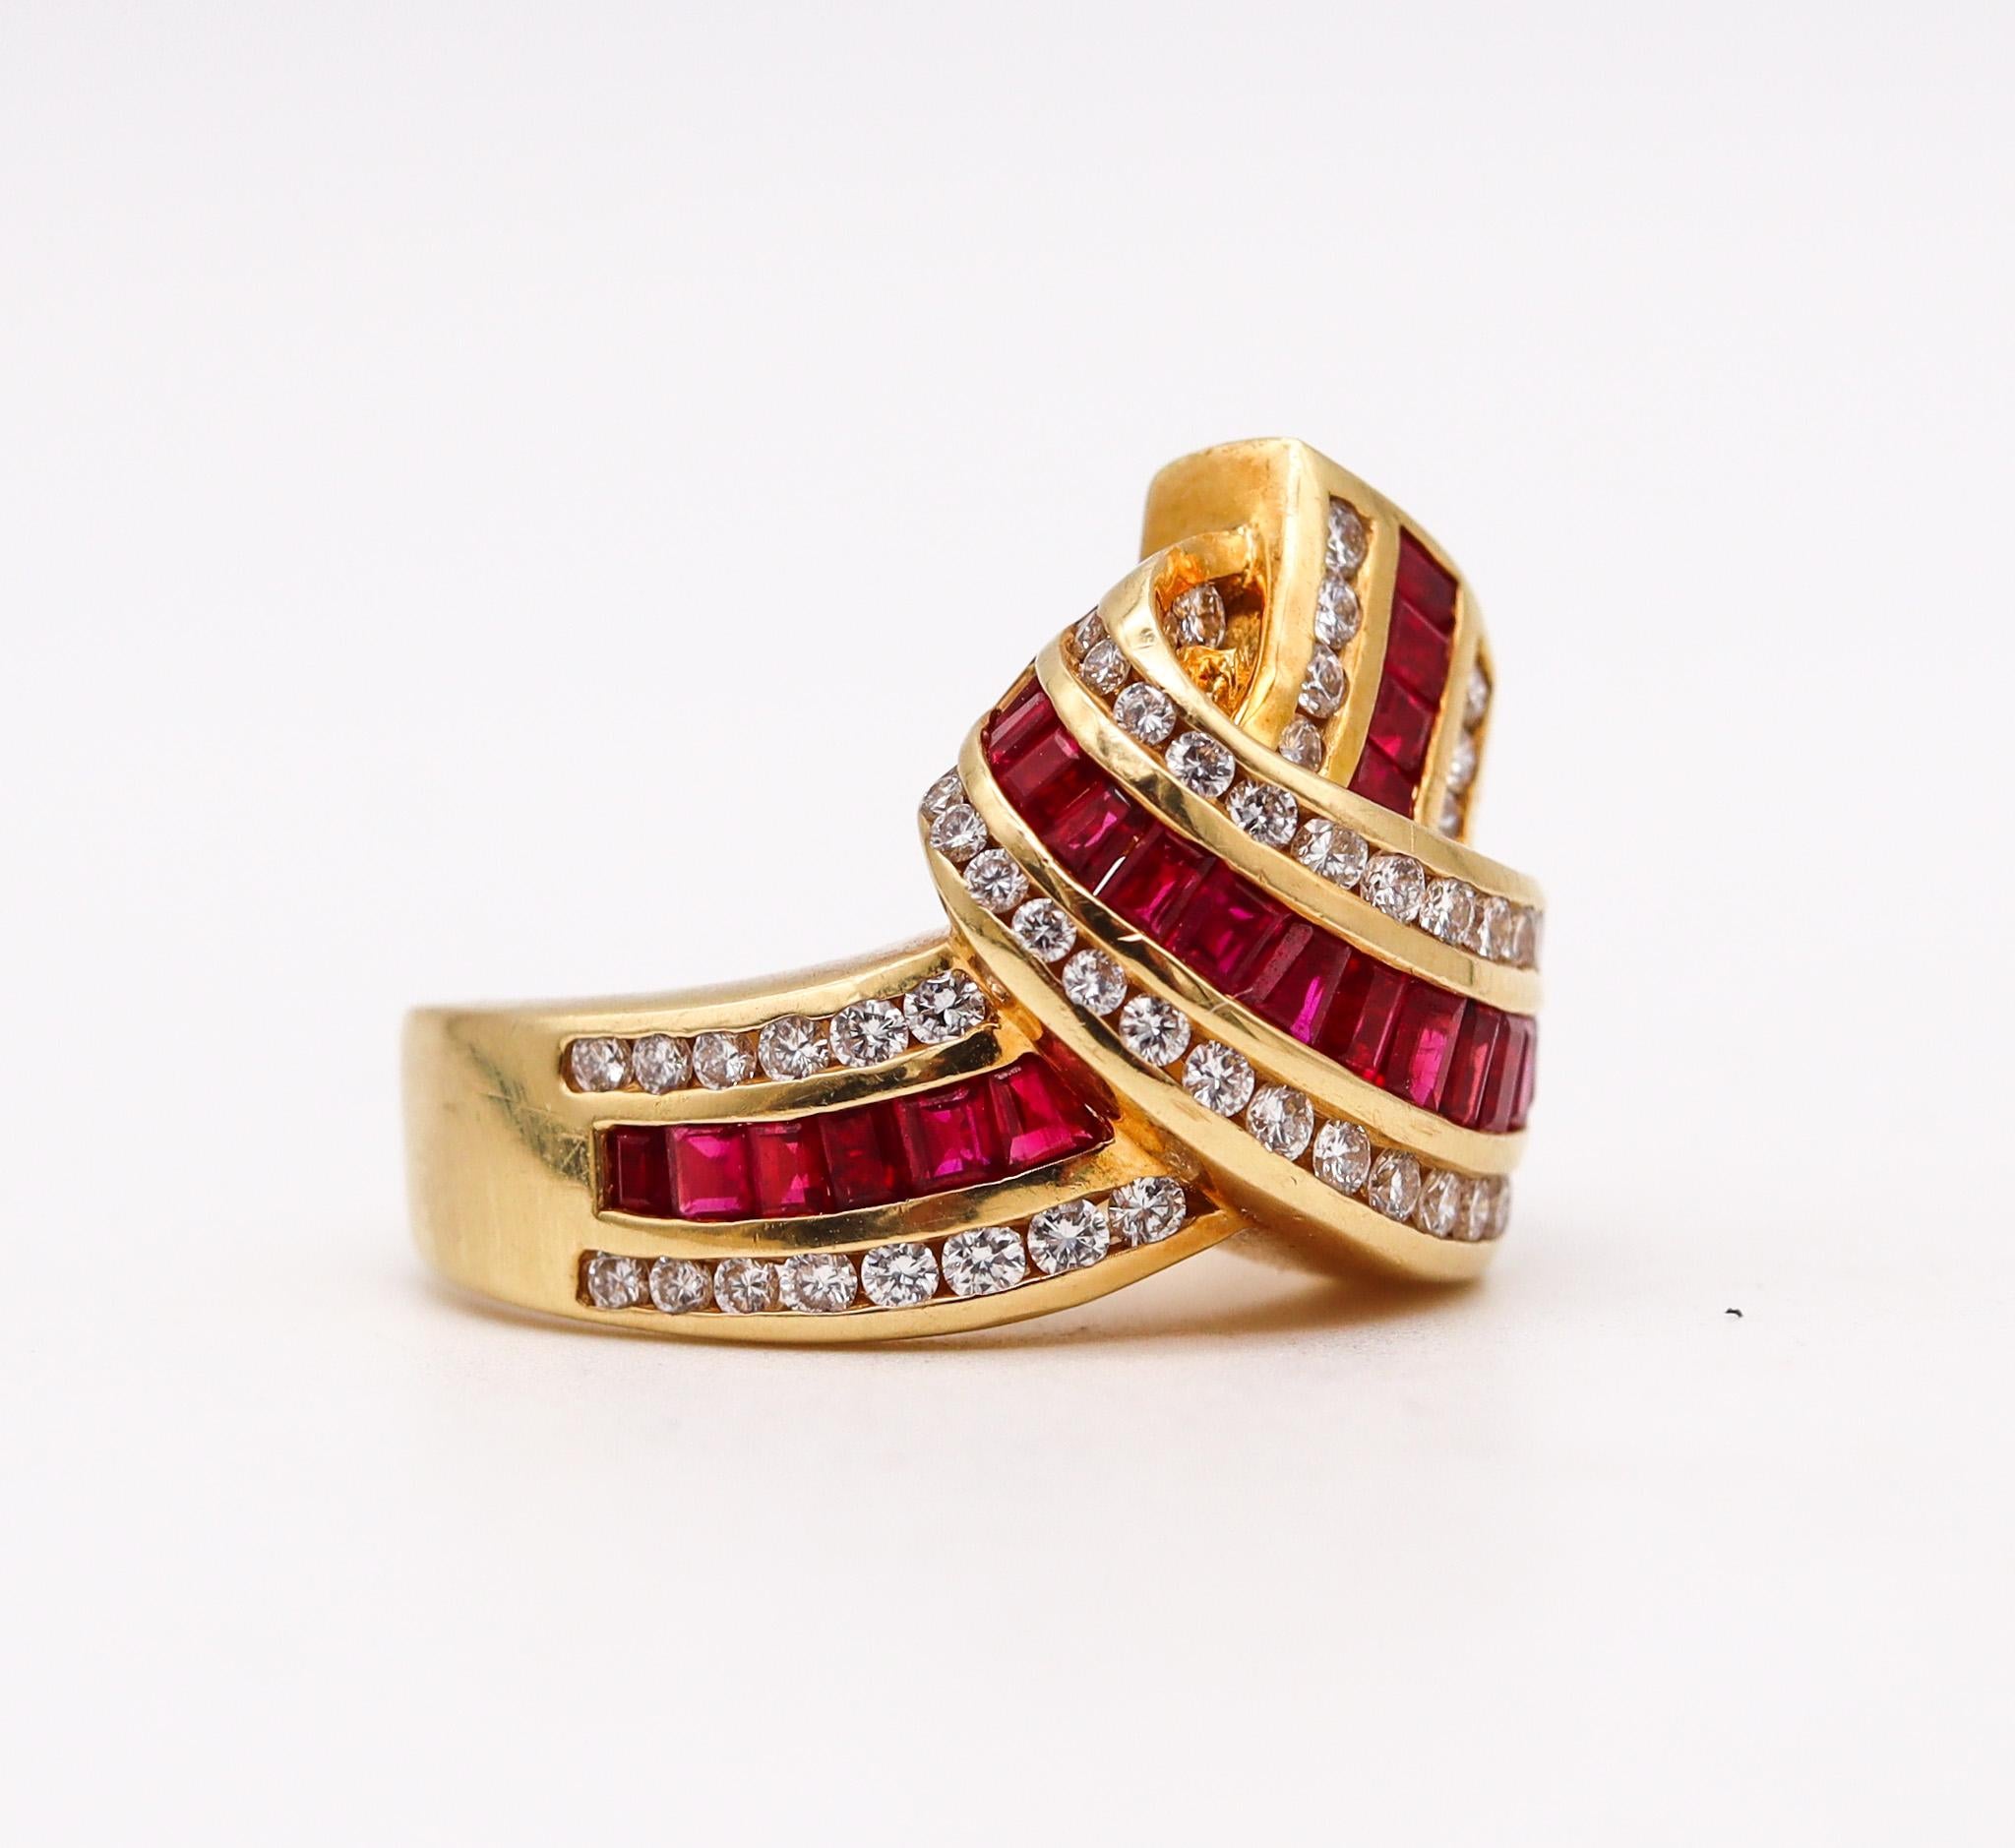 Modernist Charles Krypell Modern Ring in 18kt Gold with 4.11ctw in Diamonds and Rubies